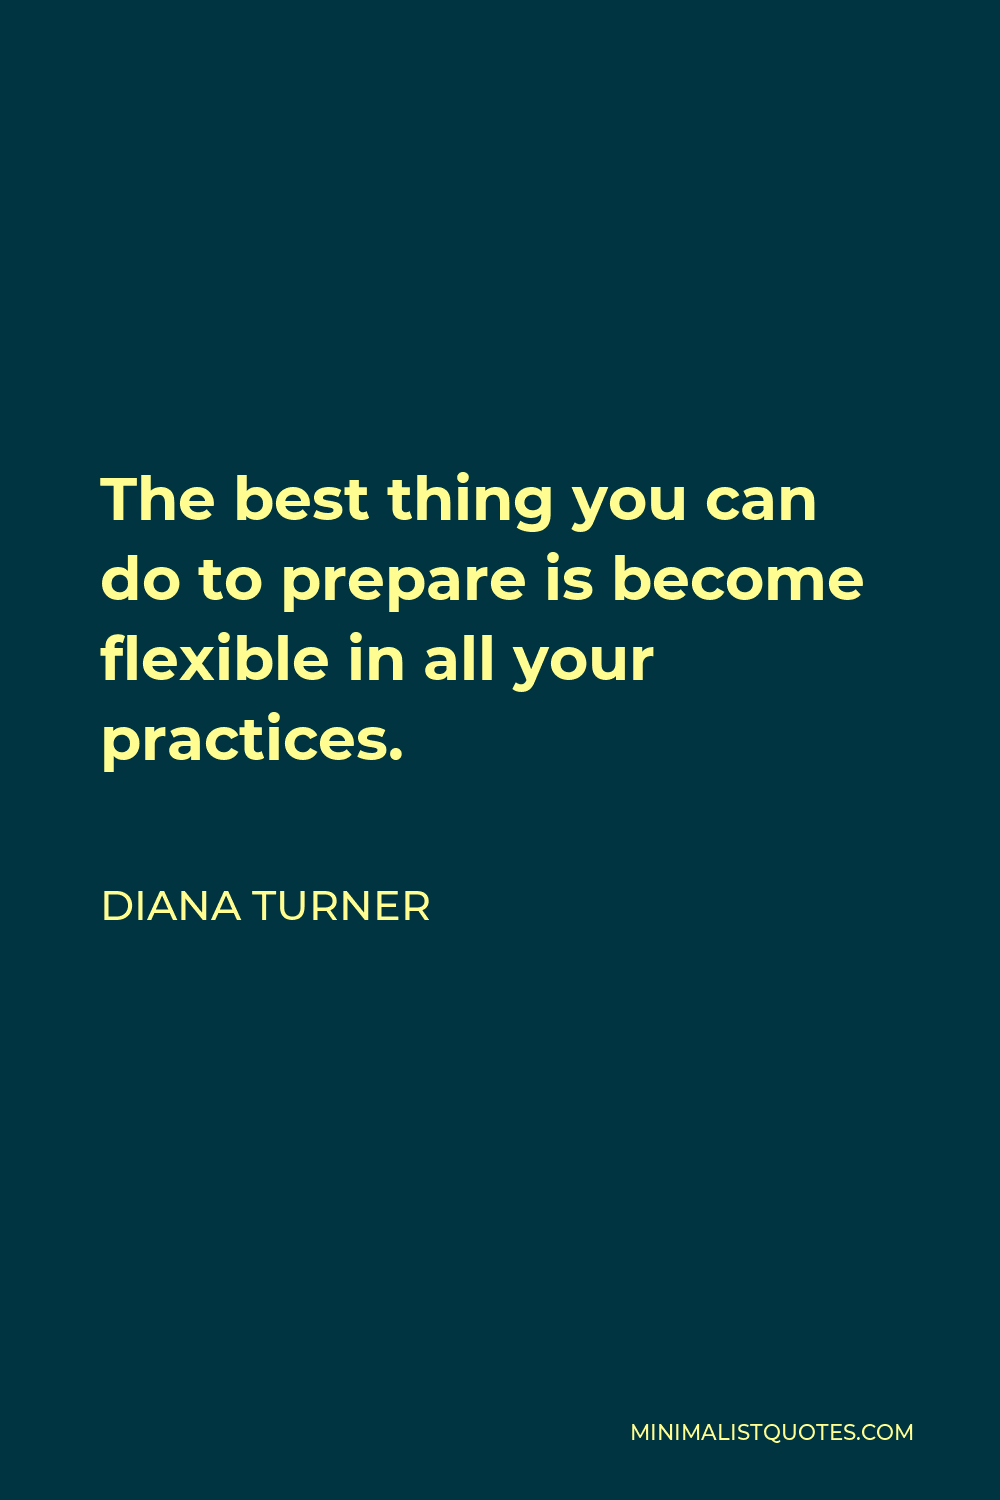 Diana Turner Quote - The best thing you can do to prepare is become flexible in all your practices.